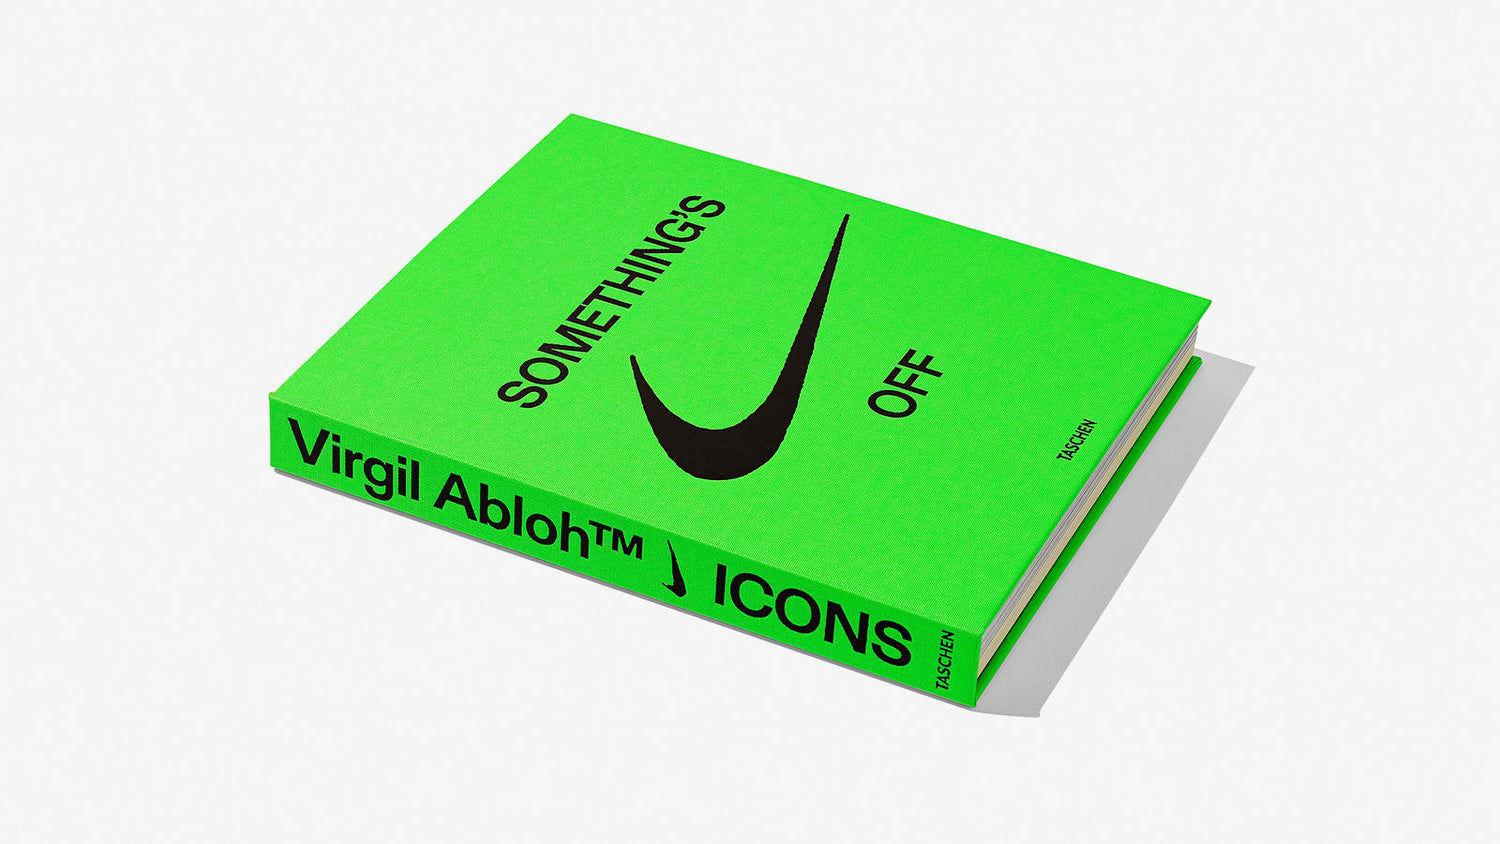 Nike and Virgil Abloh's New Book Treats the Sneaker as (Hyper)Object